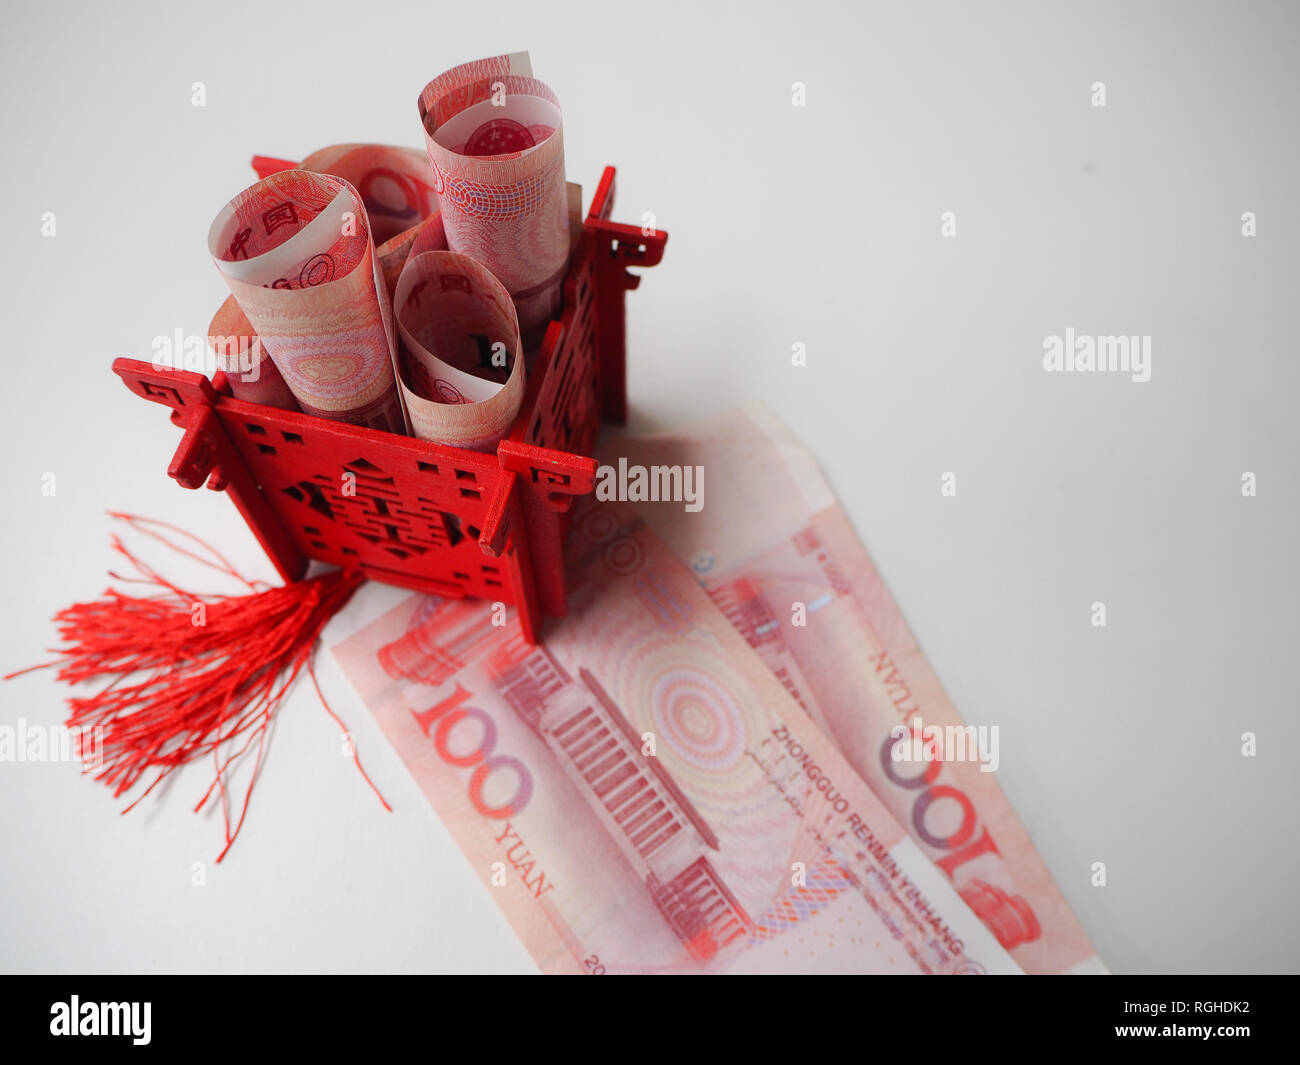 Miniature Chinese pavilion in bright red standing on and filled with Chinese 100 renminbi banknotes Stock Photo